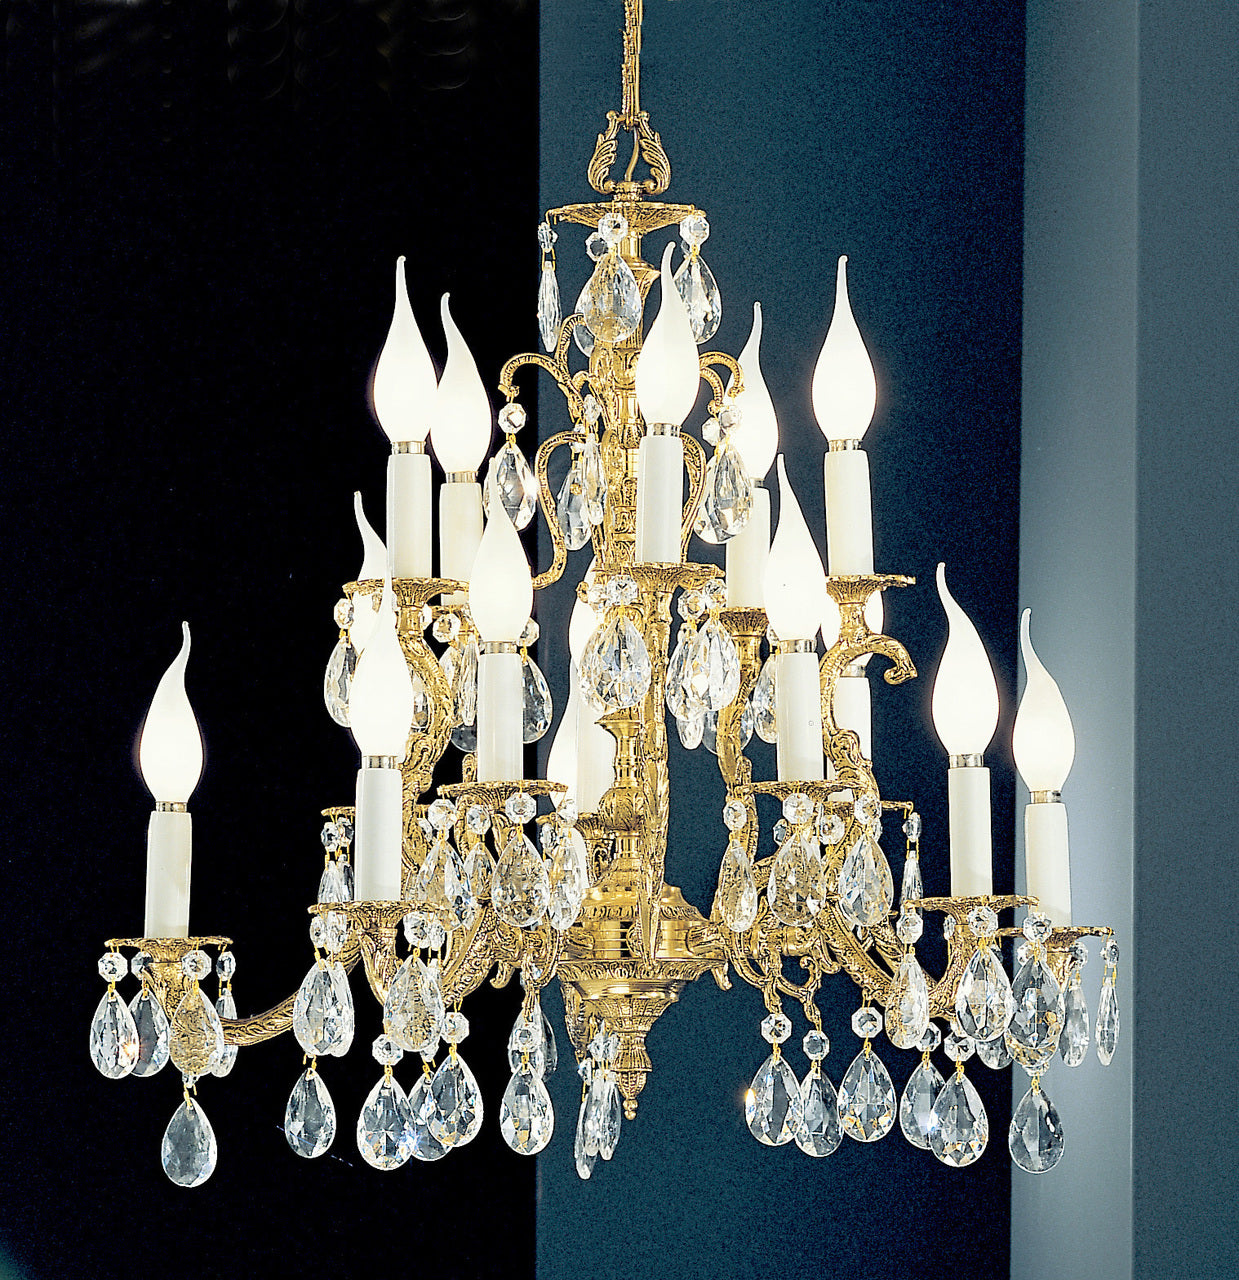 Classic Lighting 5515 OWB S Barcelona Crystal/Cast Brass Chandelier in Olde World Bronze (Imported from Spain)